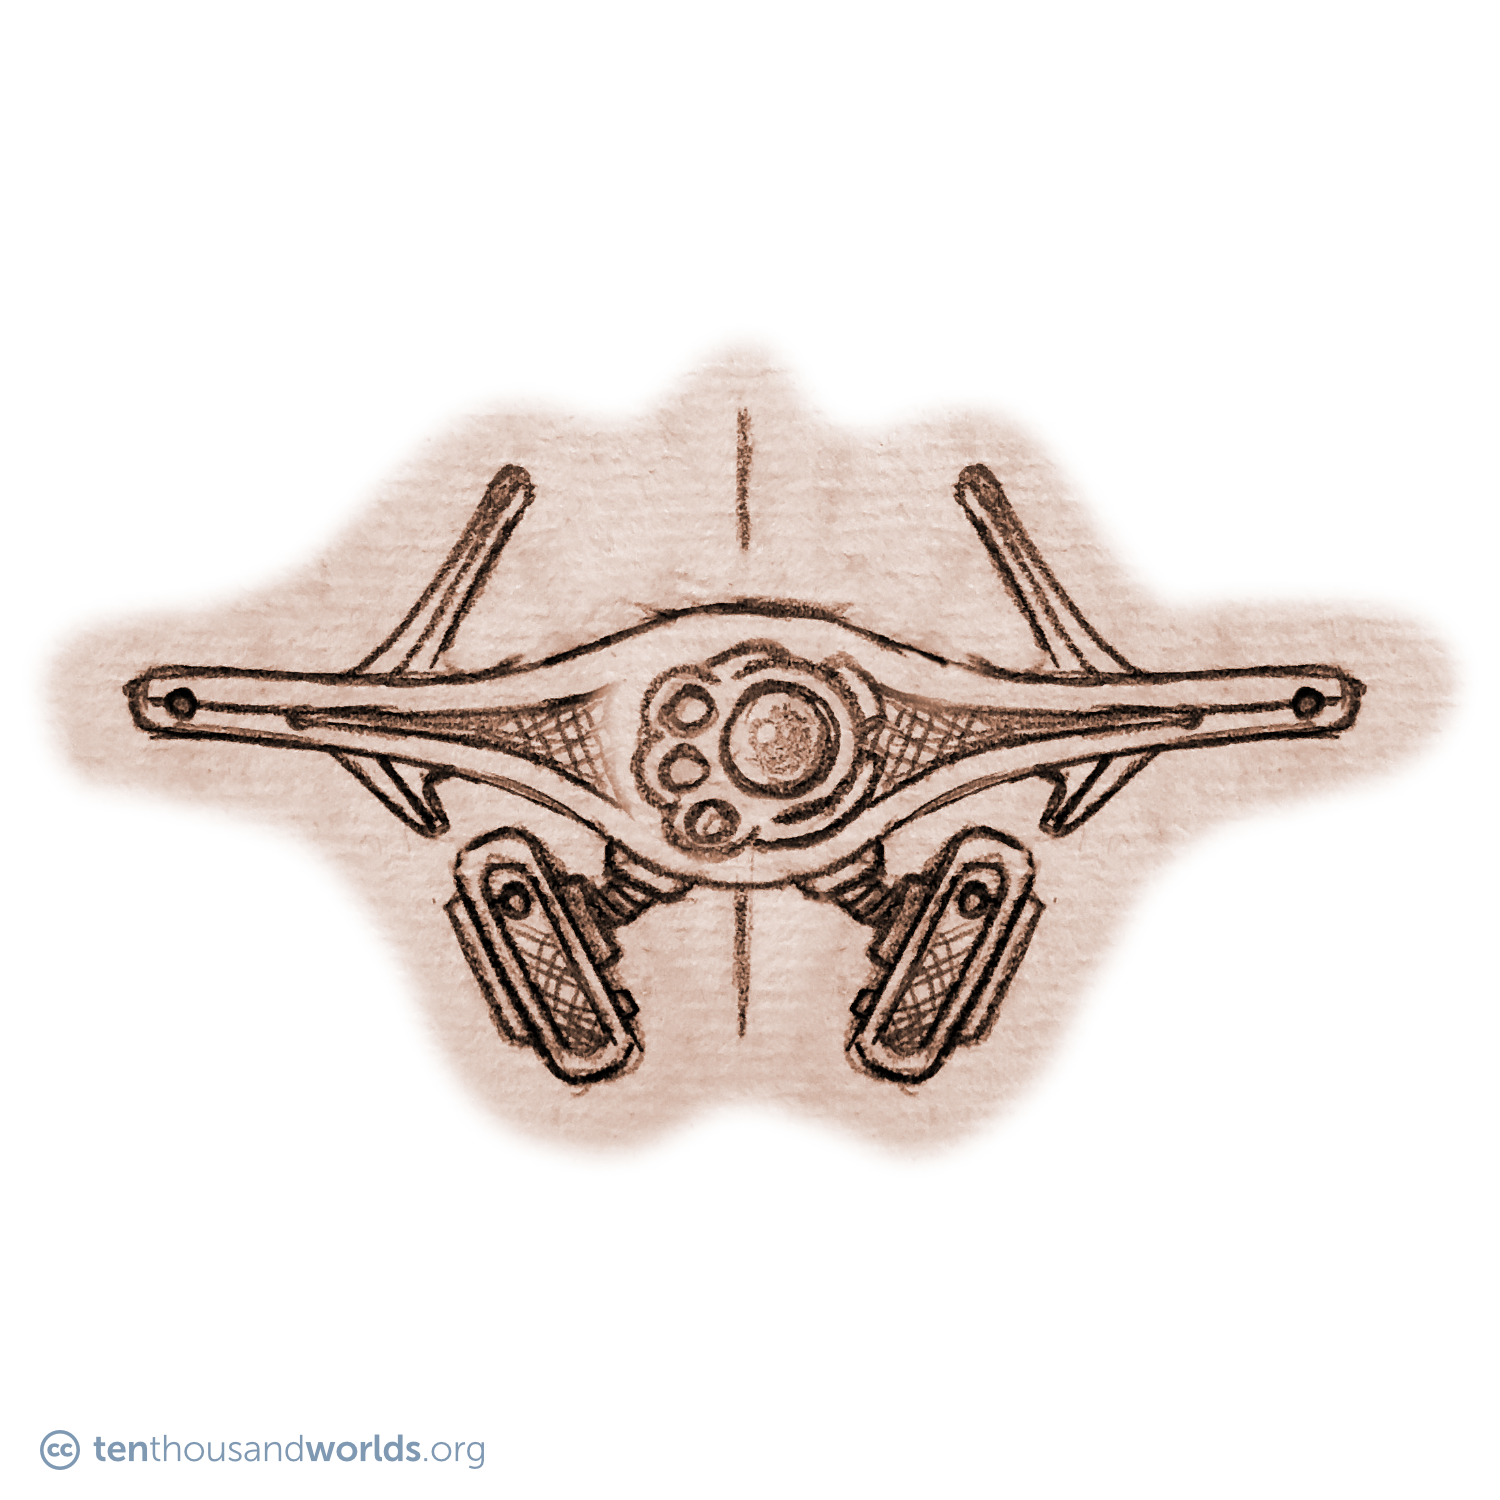 A pencil sketch of a flying delta-wing-shaped robot seen edge-on, from the front. The center bulges out to hold a cluster of camera eyes. Halfway along each side, a short fin projects down while a larger fin projects up. Two rectangular guns are slung under the center of the wing by a pair of articulated arms.